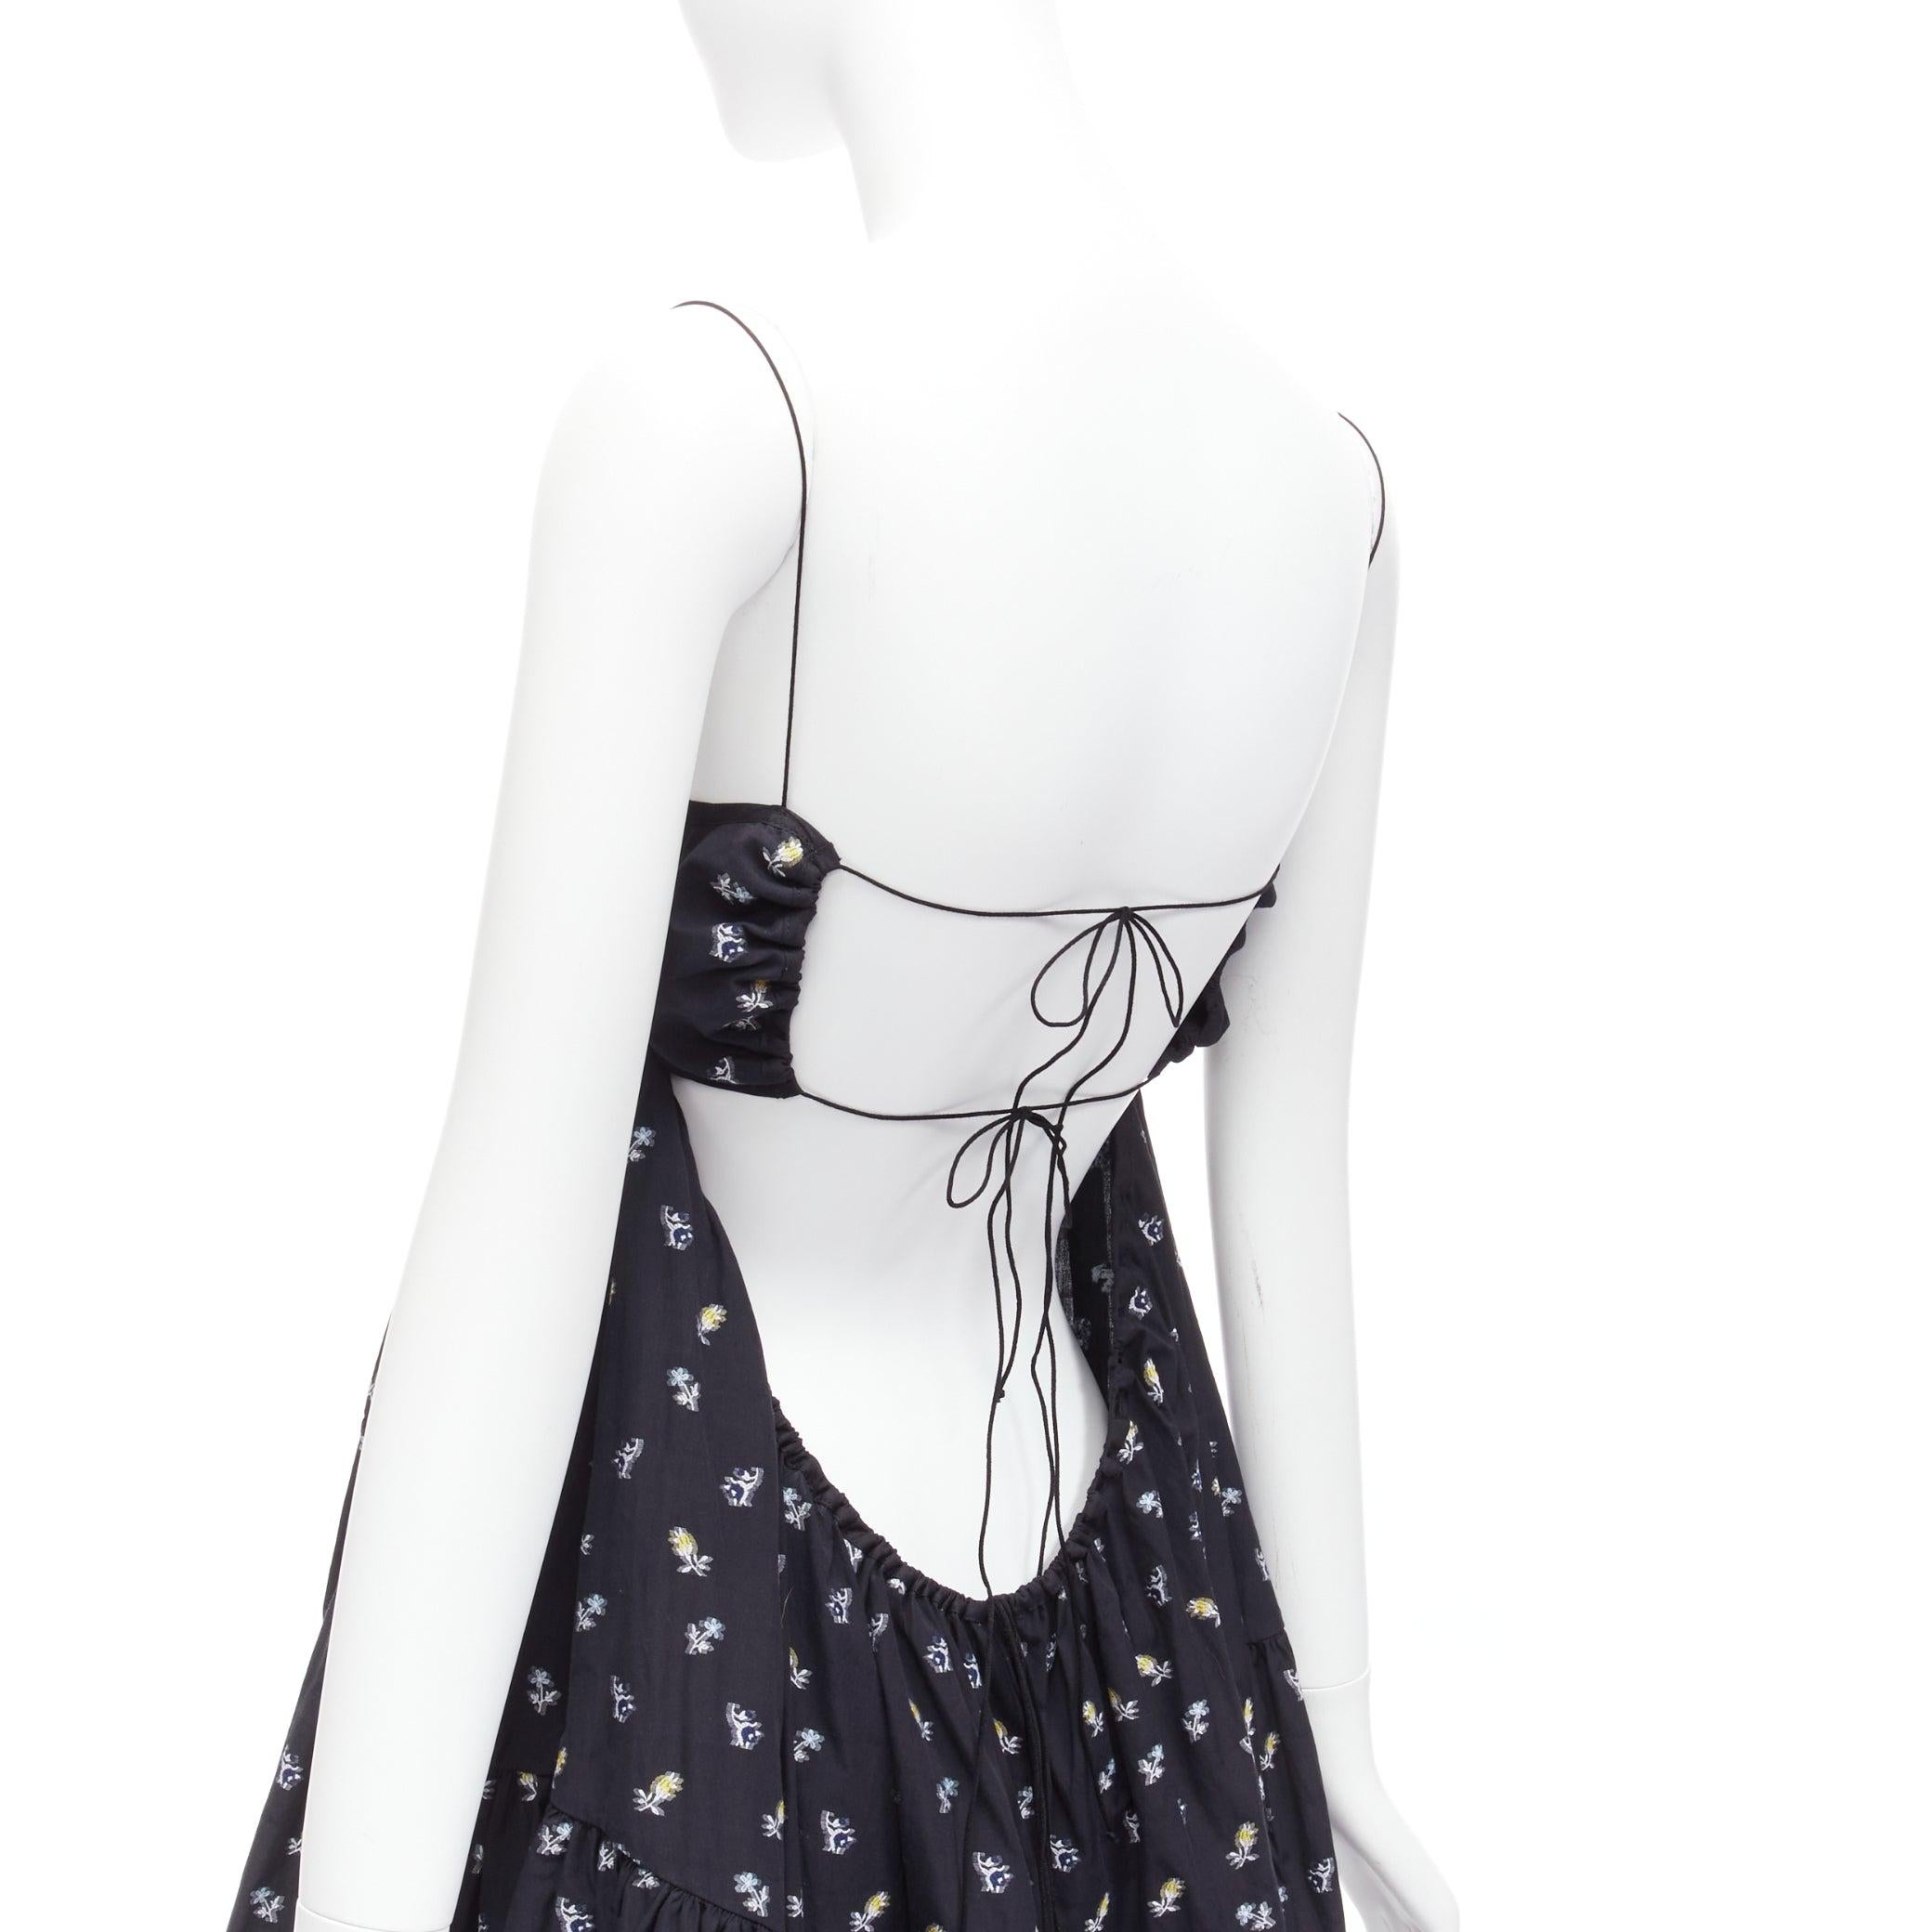 CECILIE BAHNSEN black floral empire waist string strap babydoll flared dress US6 M
Reference: LNKO/A02212
Brand: Cecilie Bahnsen
Material: Cotton
Color: Black, Multicolour
Pattern: Floral
Closure: Self Tie
Extra Details: Low cut back.
Made in: